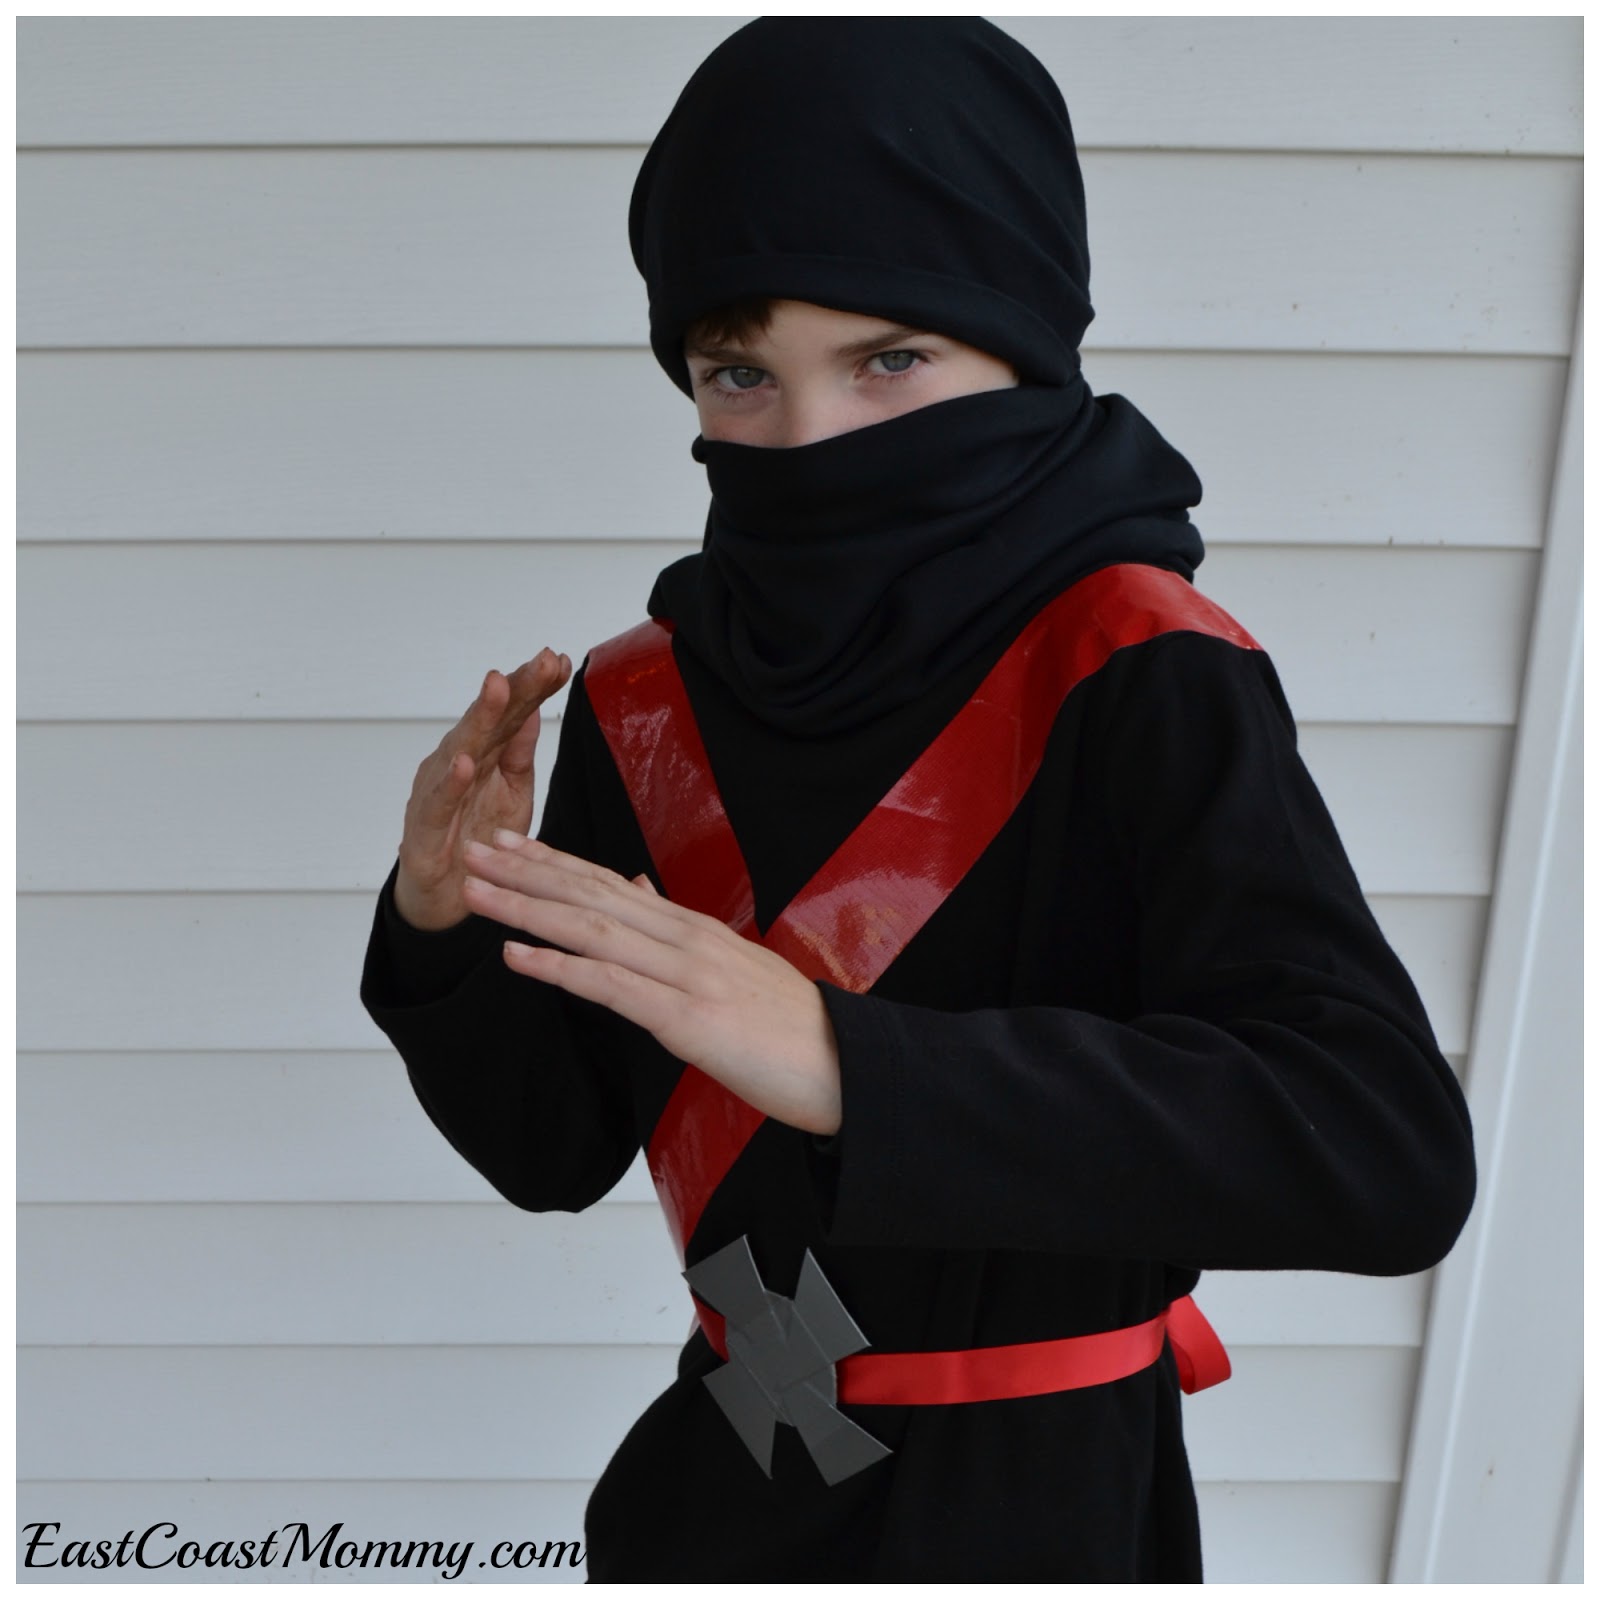 East Coast Mommy: Easy Black Ninja Costume (no sewing required)